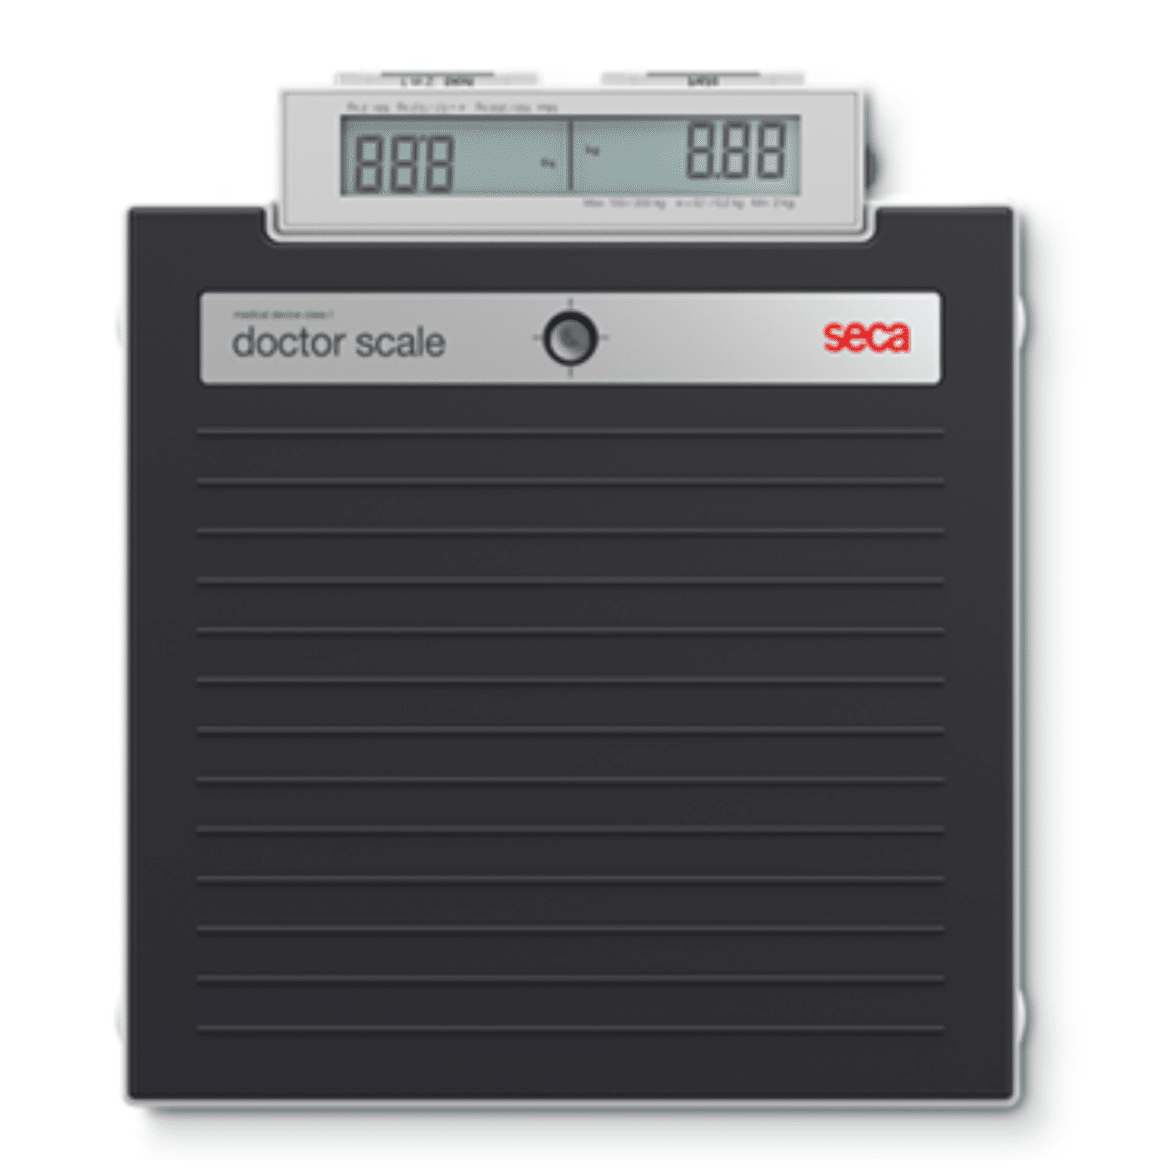 440lbs Physician Medical Body Weight Scale Medical Measure Height